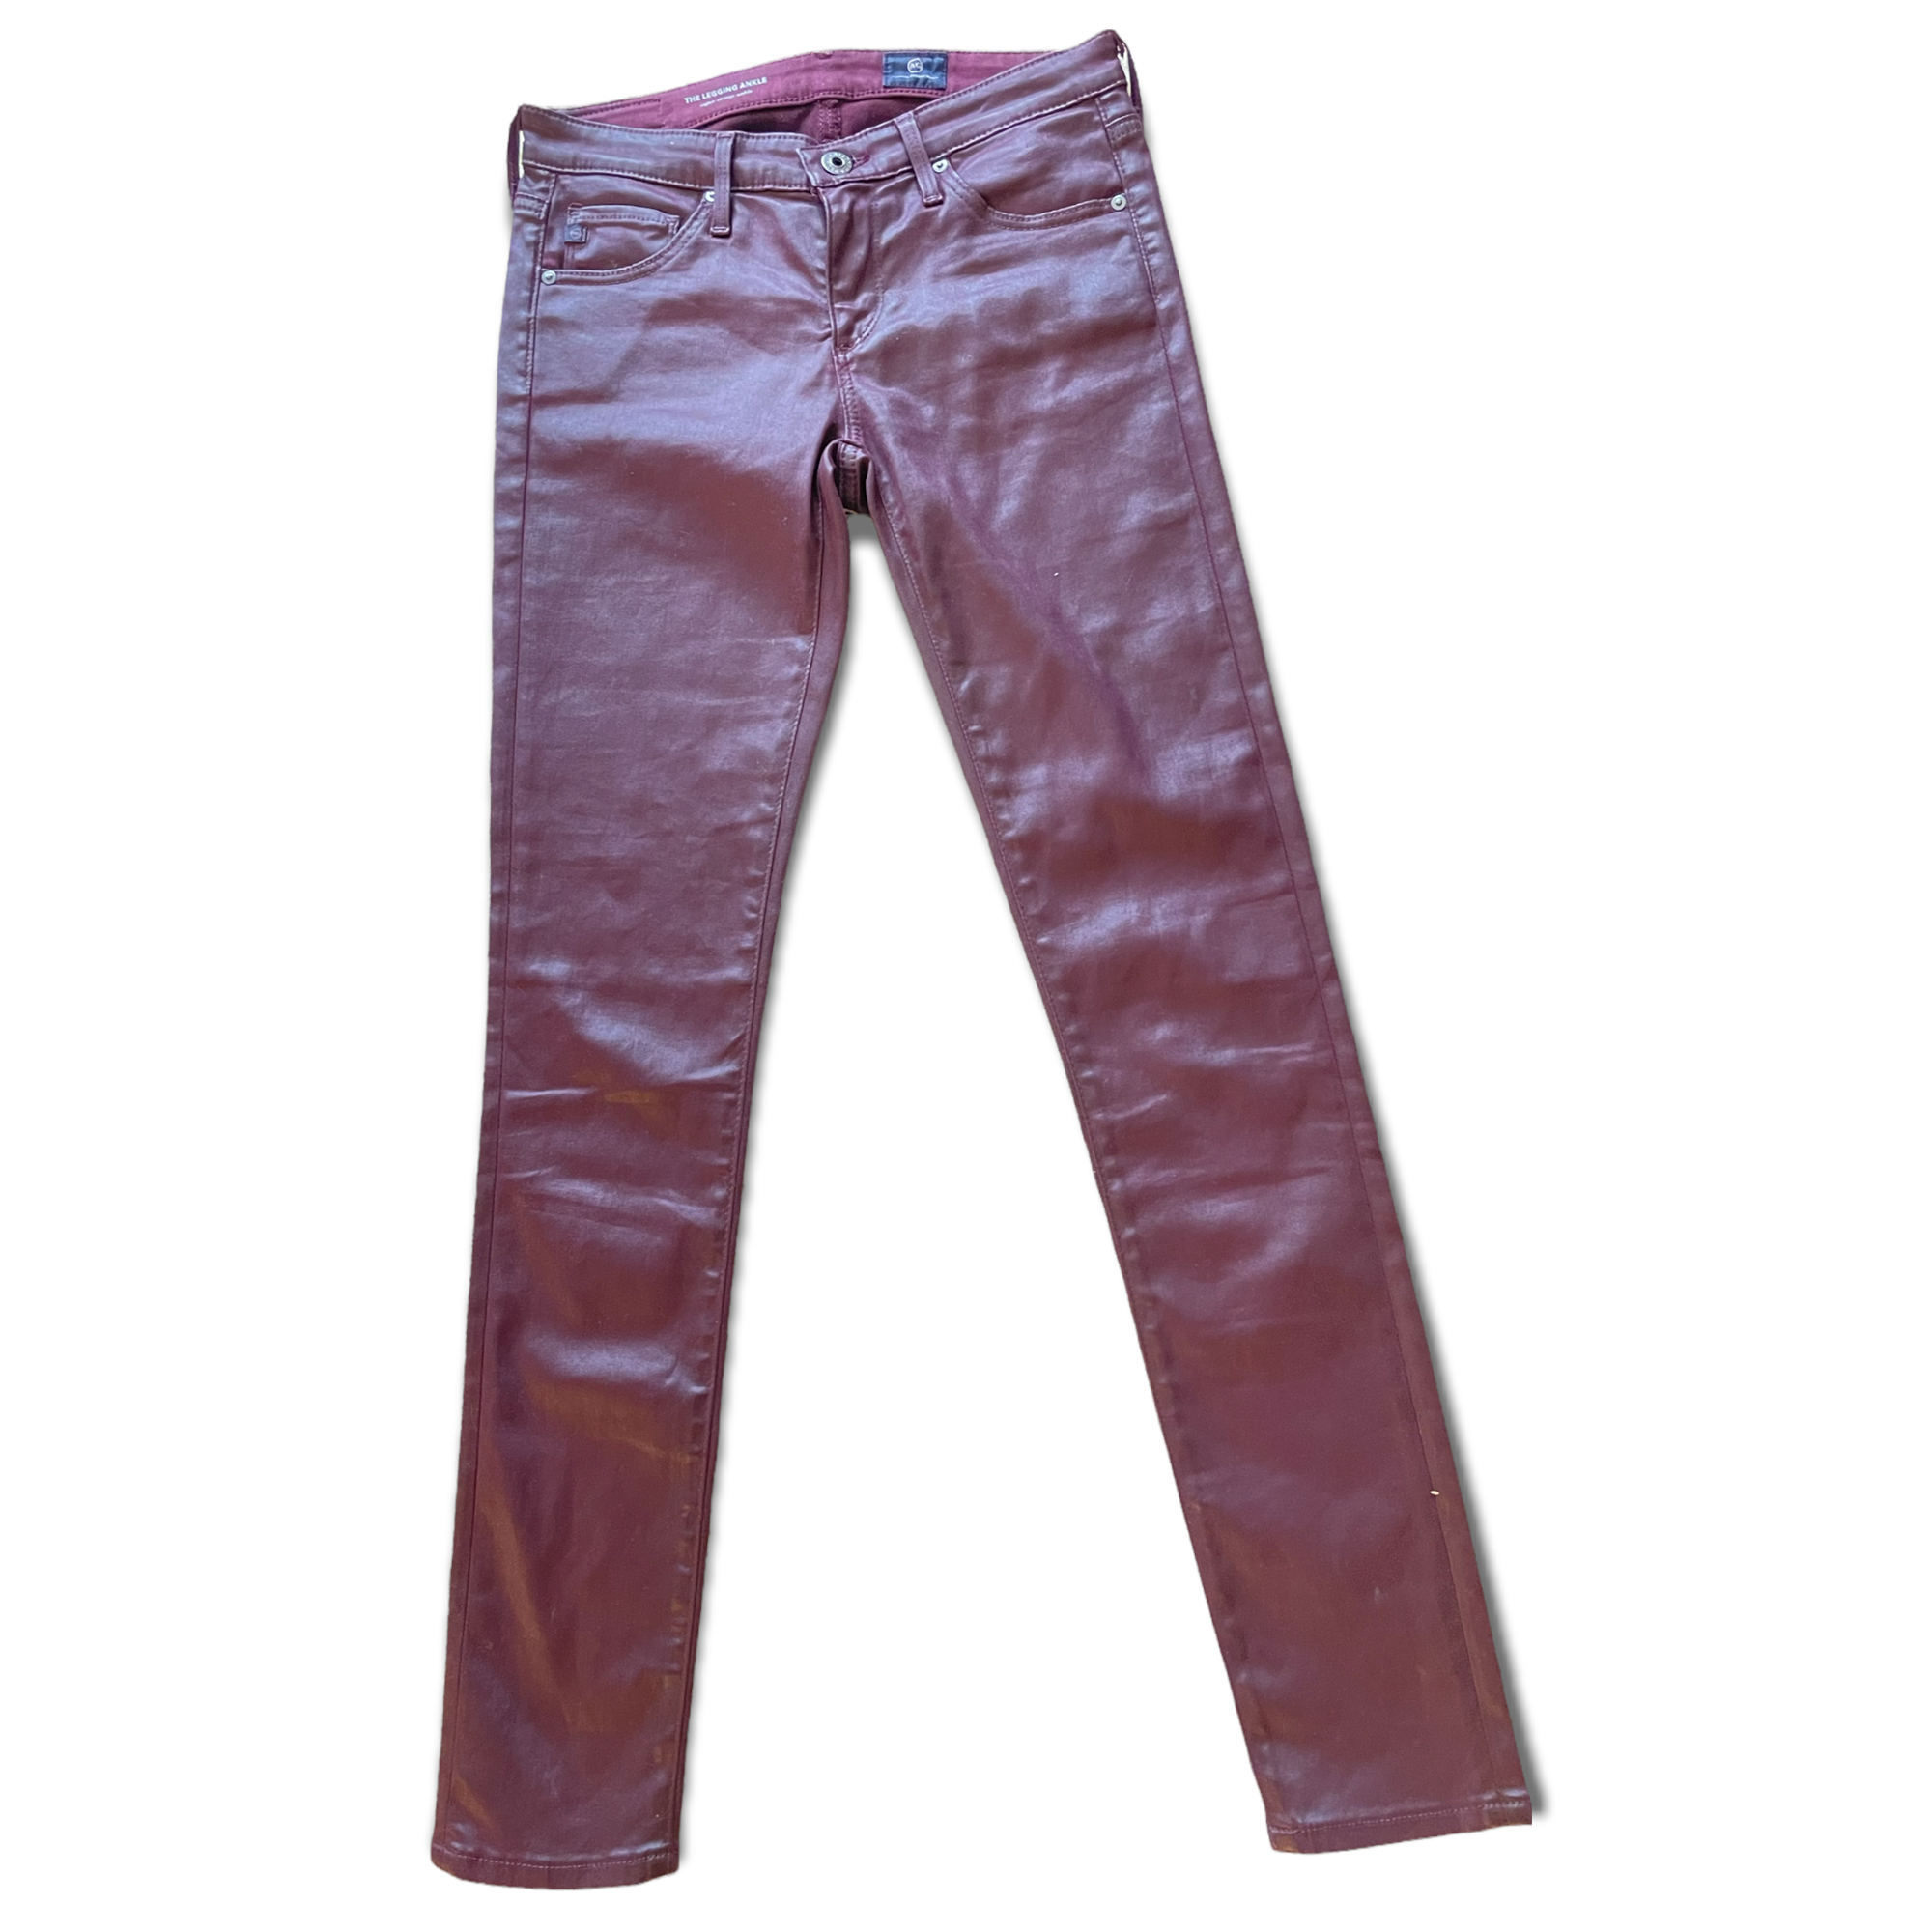 Womens AG Adriano Goldschmeid Pants Super Skinny Ankle Pants |Size: 24R|